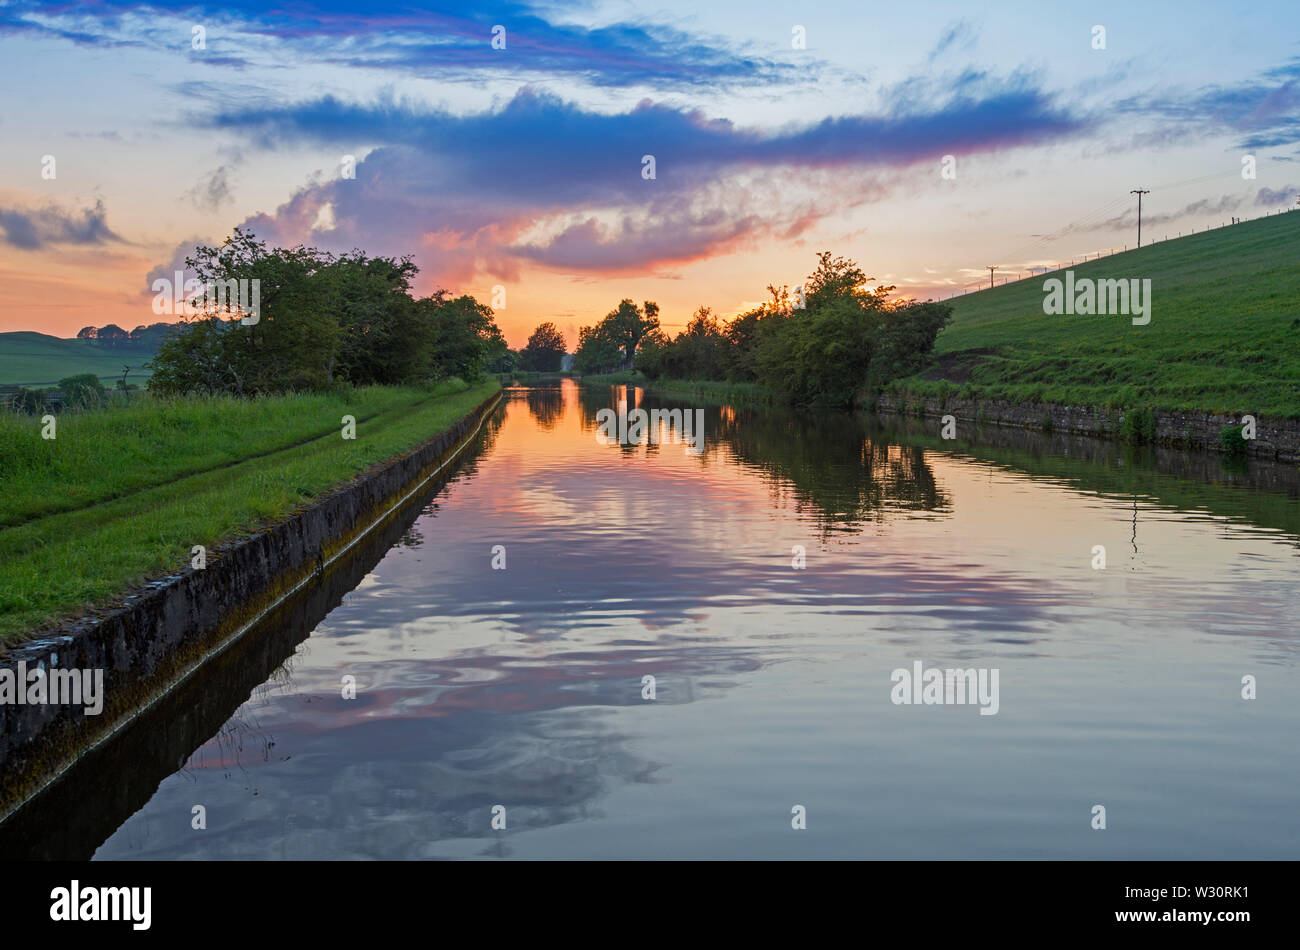 View of an English rural countryside scenery on British waterway canal during cloudy day at sunset dusk Stock Photo